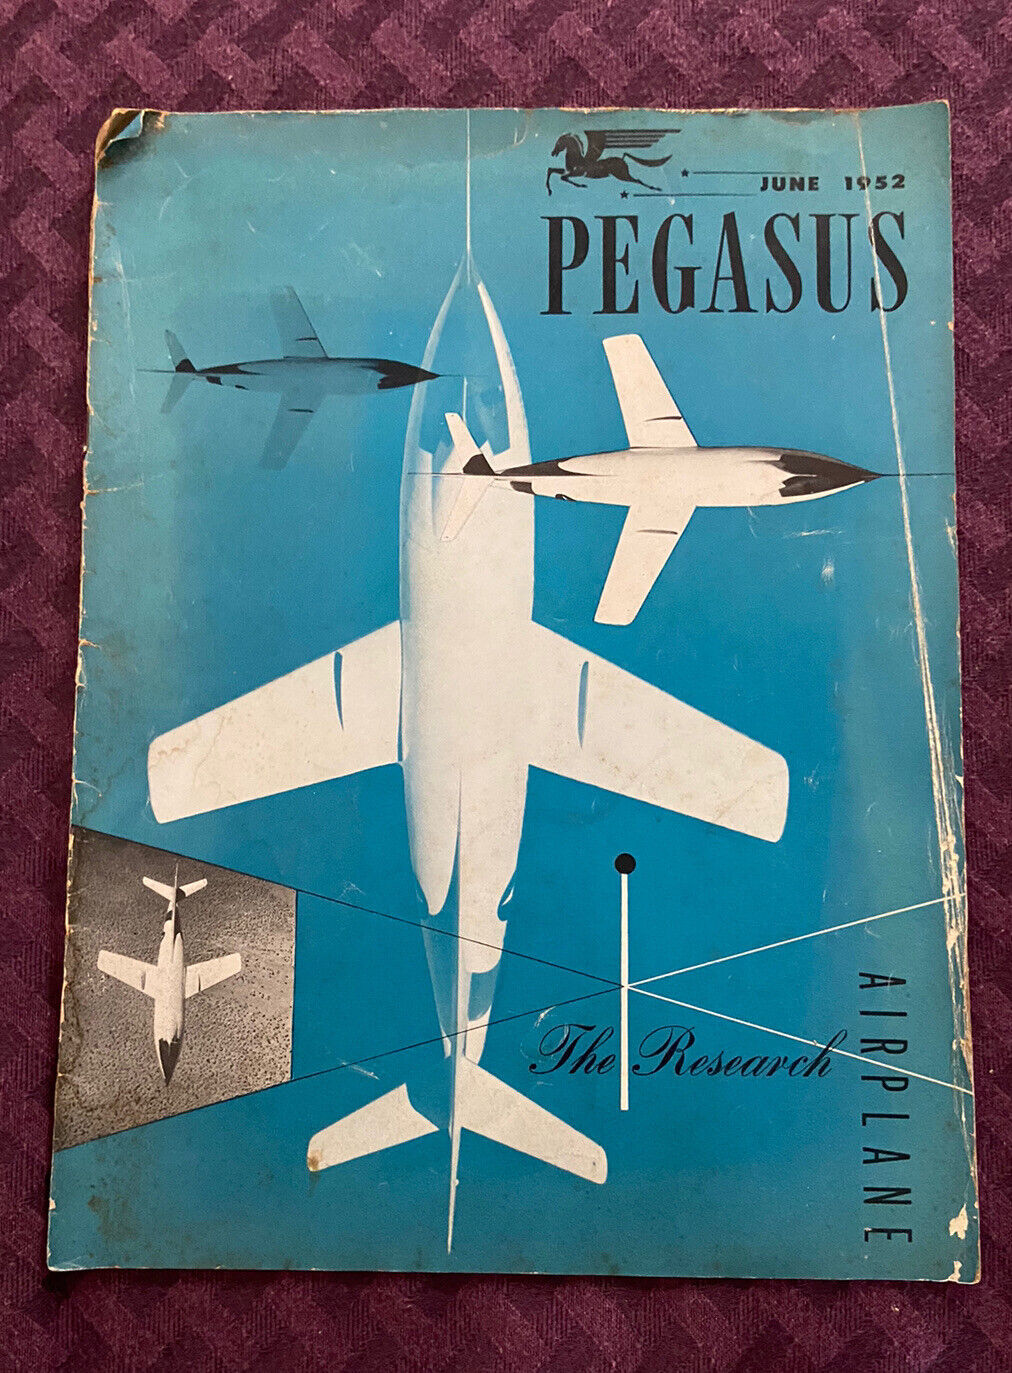 Pegasus The Research Airplane Publication Of Fairchild Engine Corp. June 1952